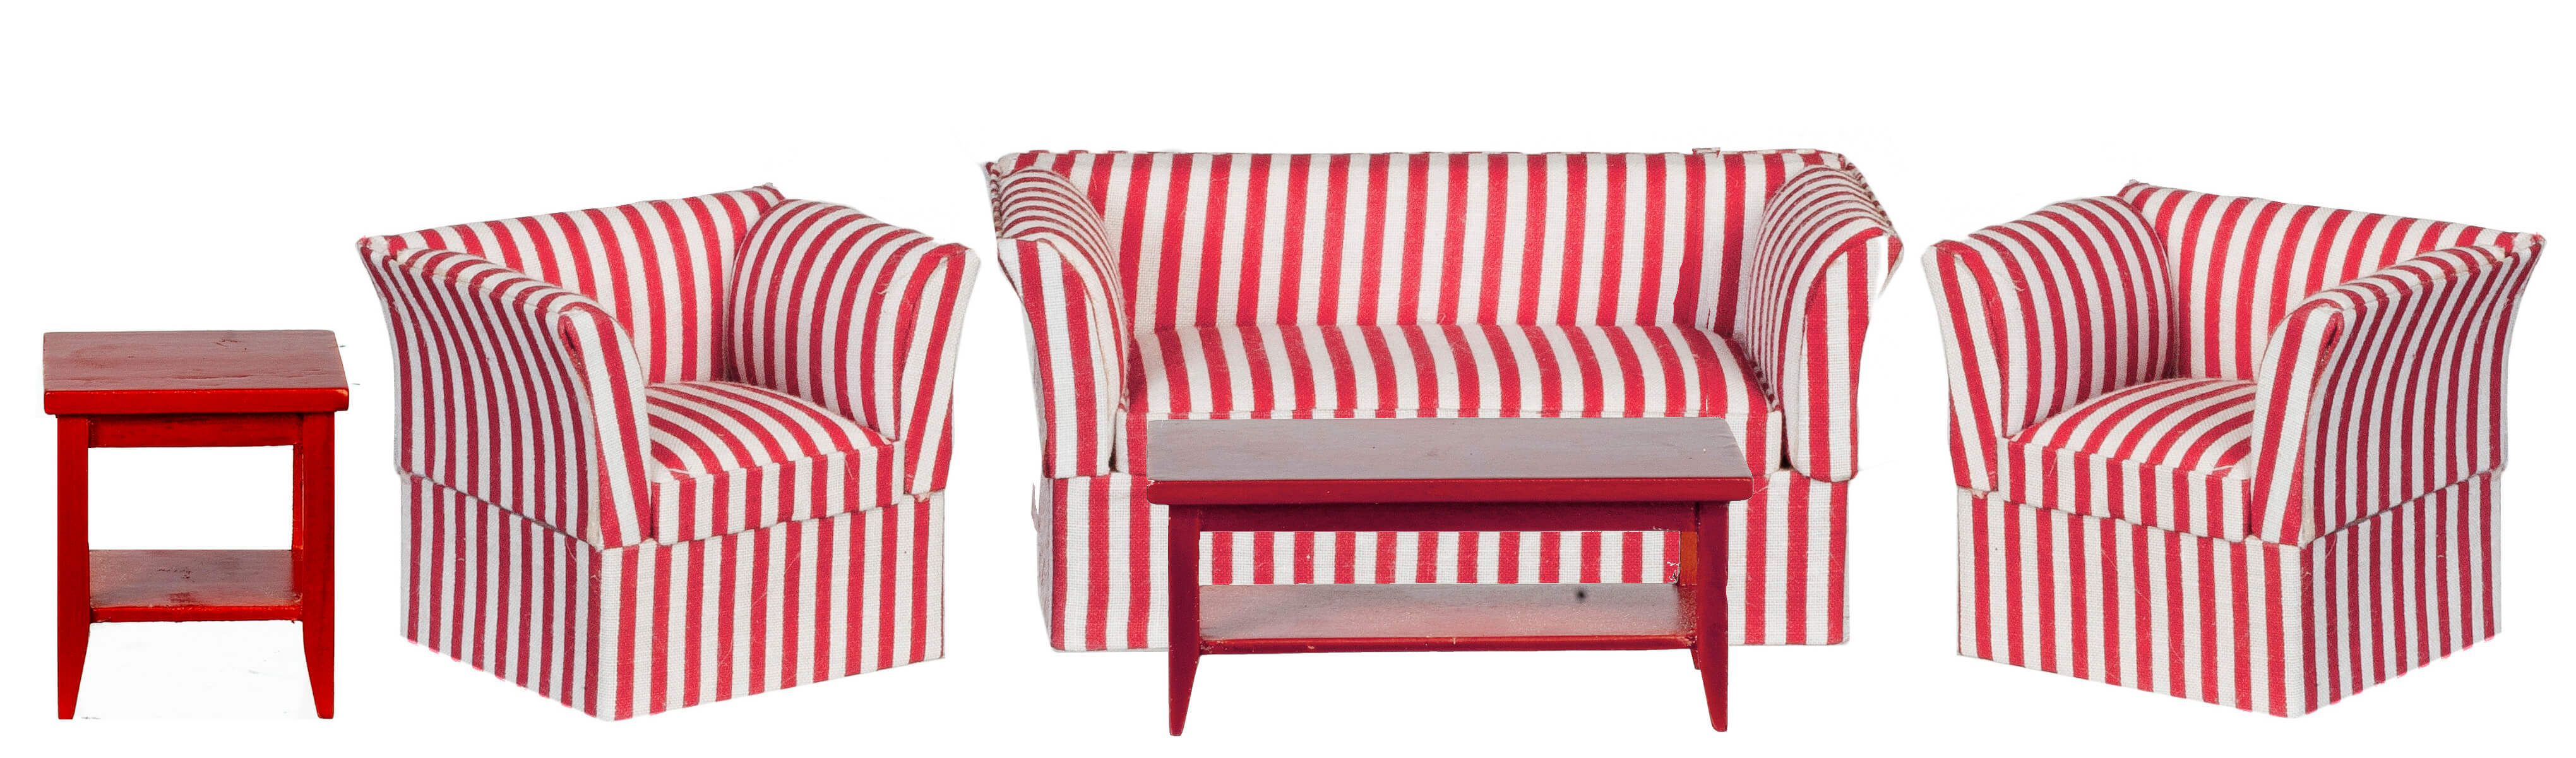 Red & White Striped Sofa & Chair Living Room Set - 5pc